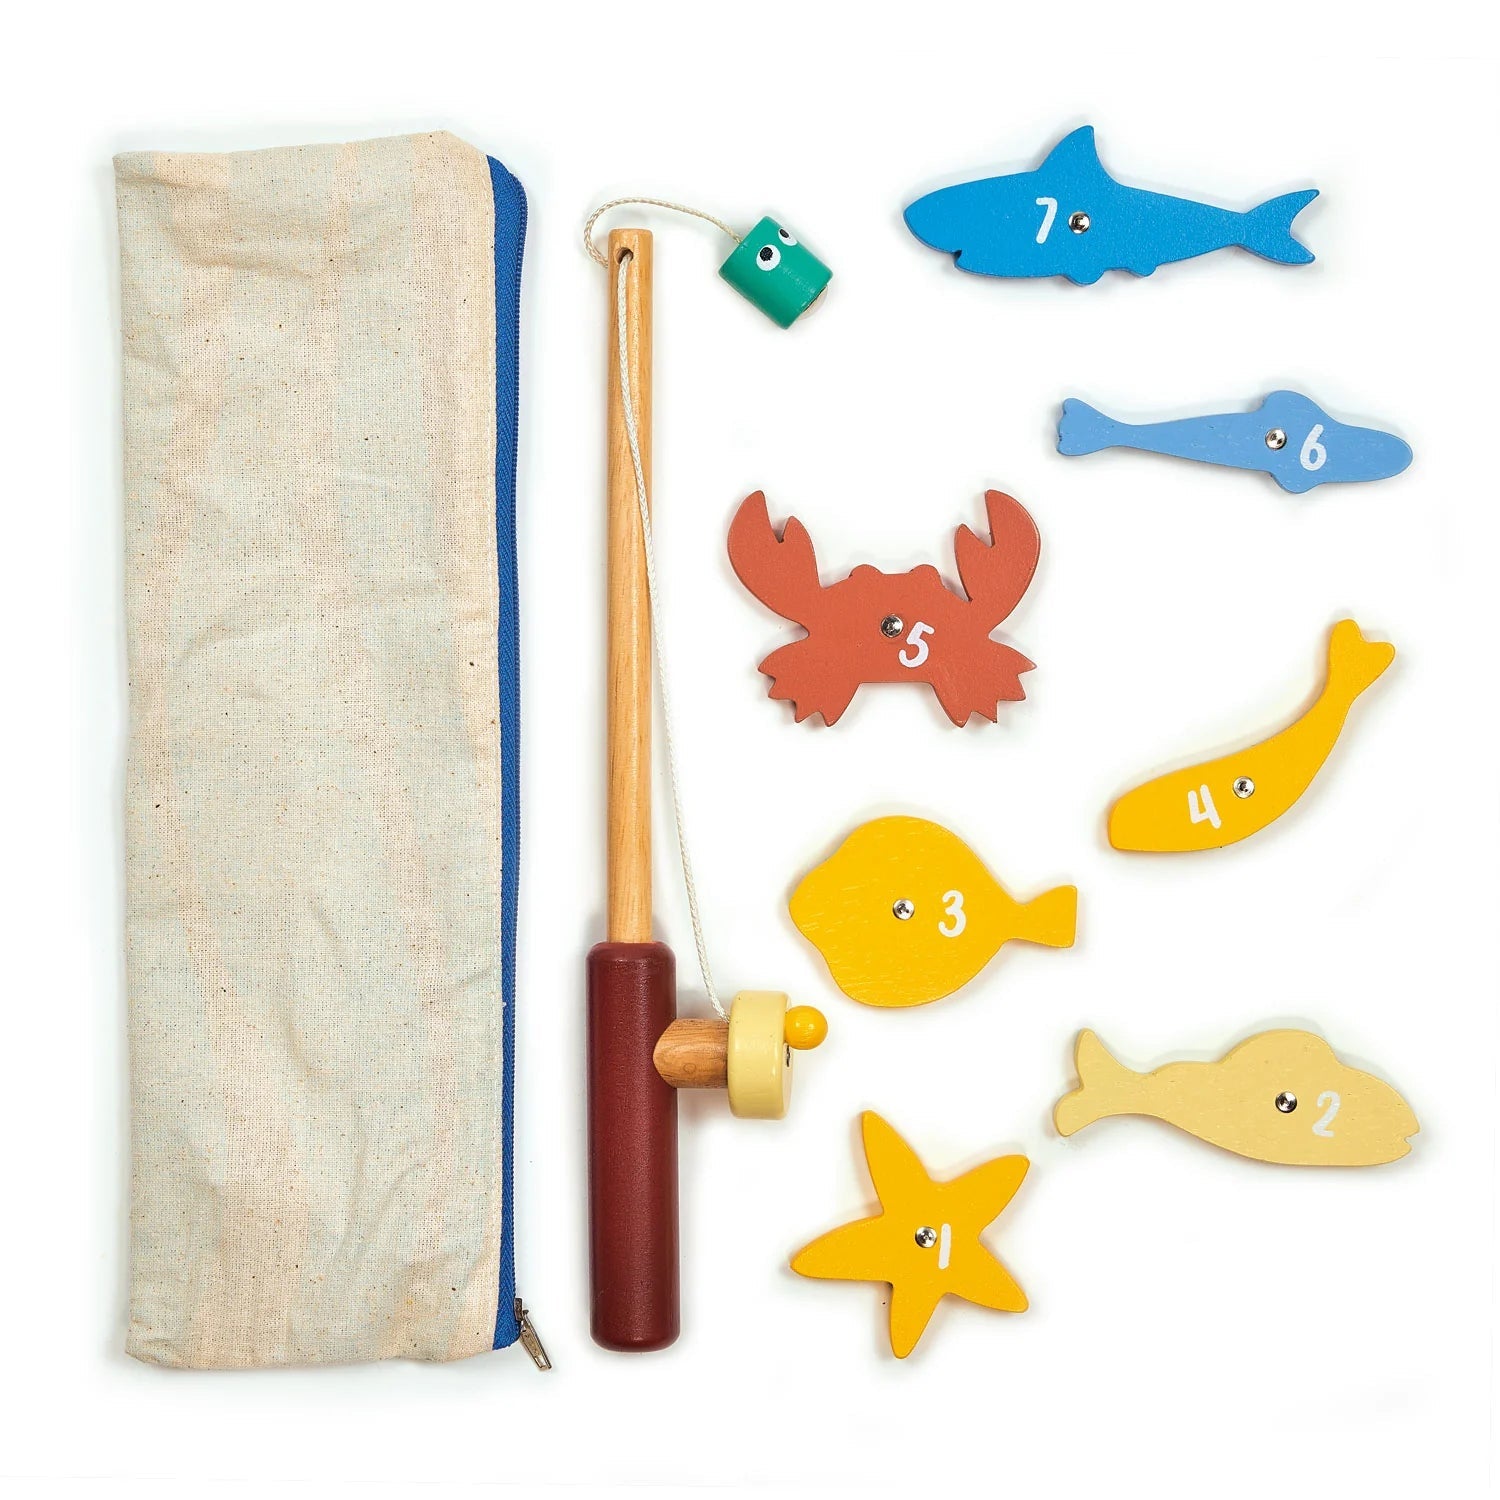 Mentari Magnetic Fishing Game Toy with Sea Creatures Numbers Mt7303